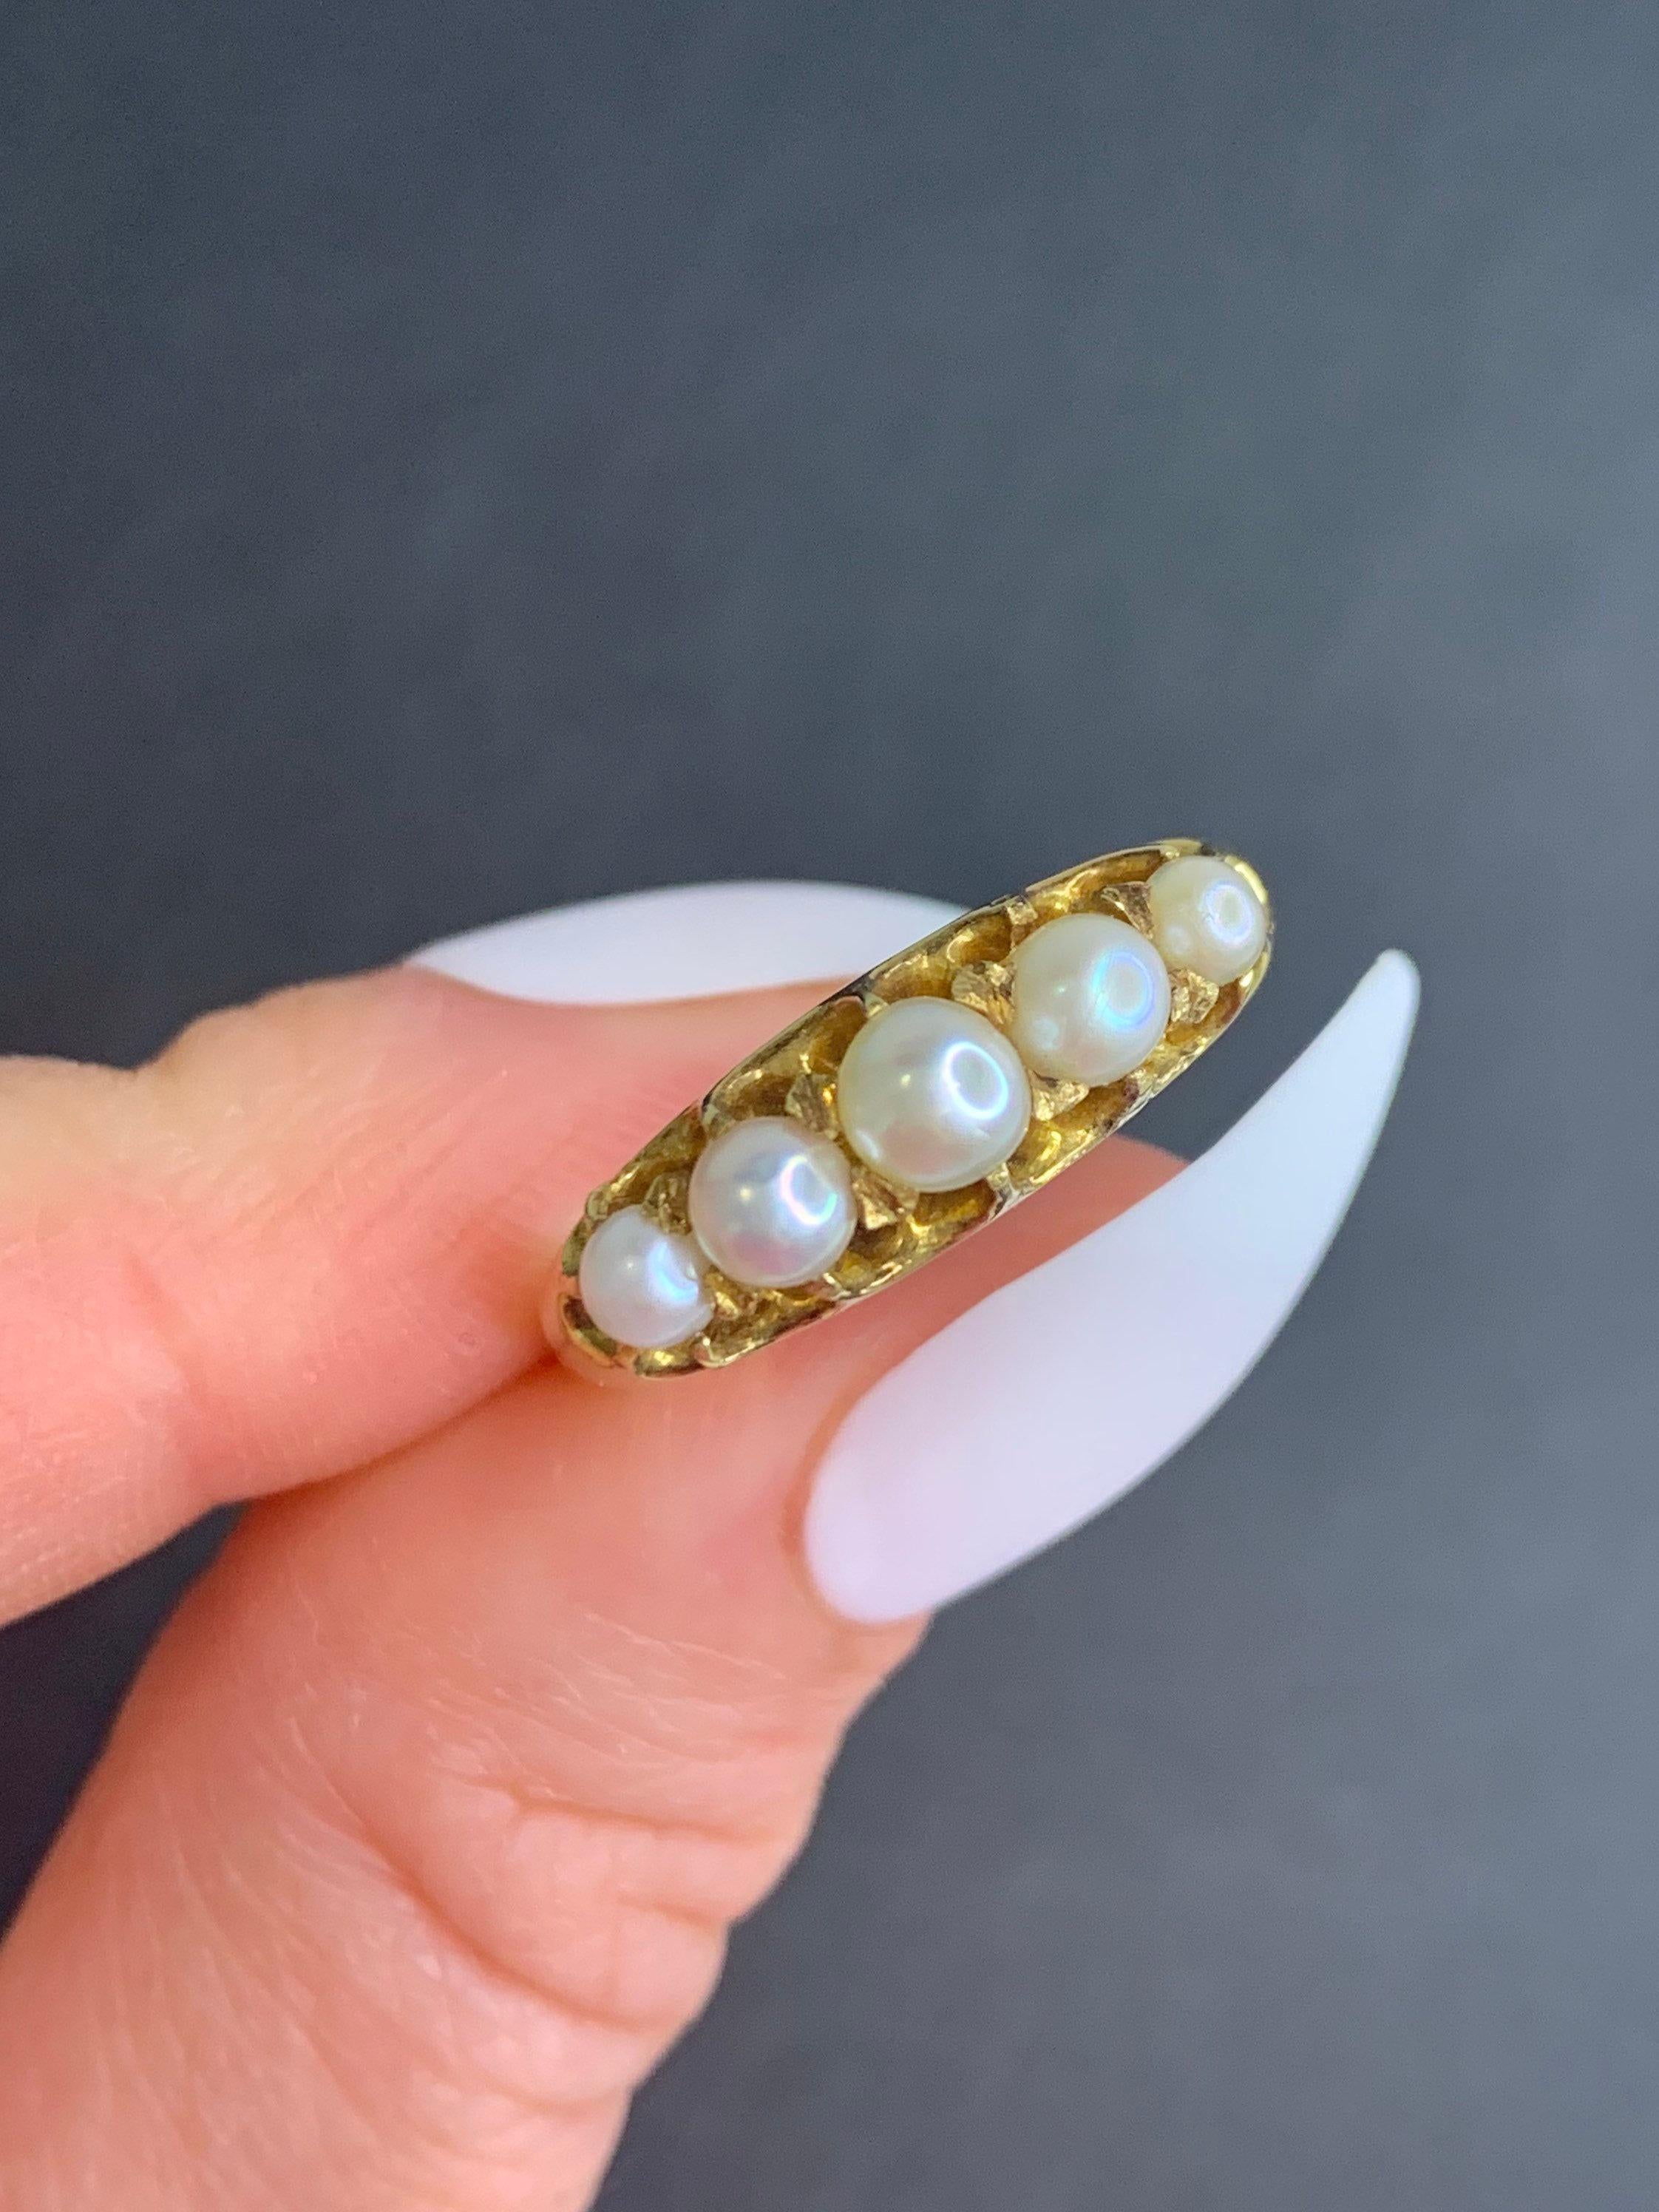 Antique 18ct Gold Edwardian Pearl 5 Stone Ring In Good Condition For Sale In Brighton, GB